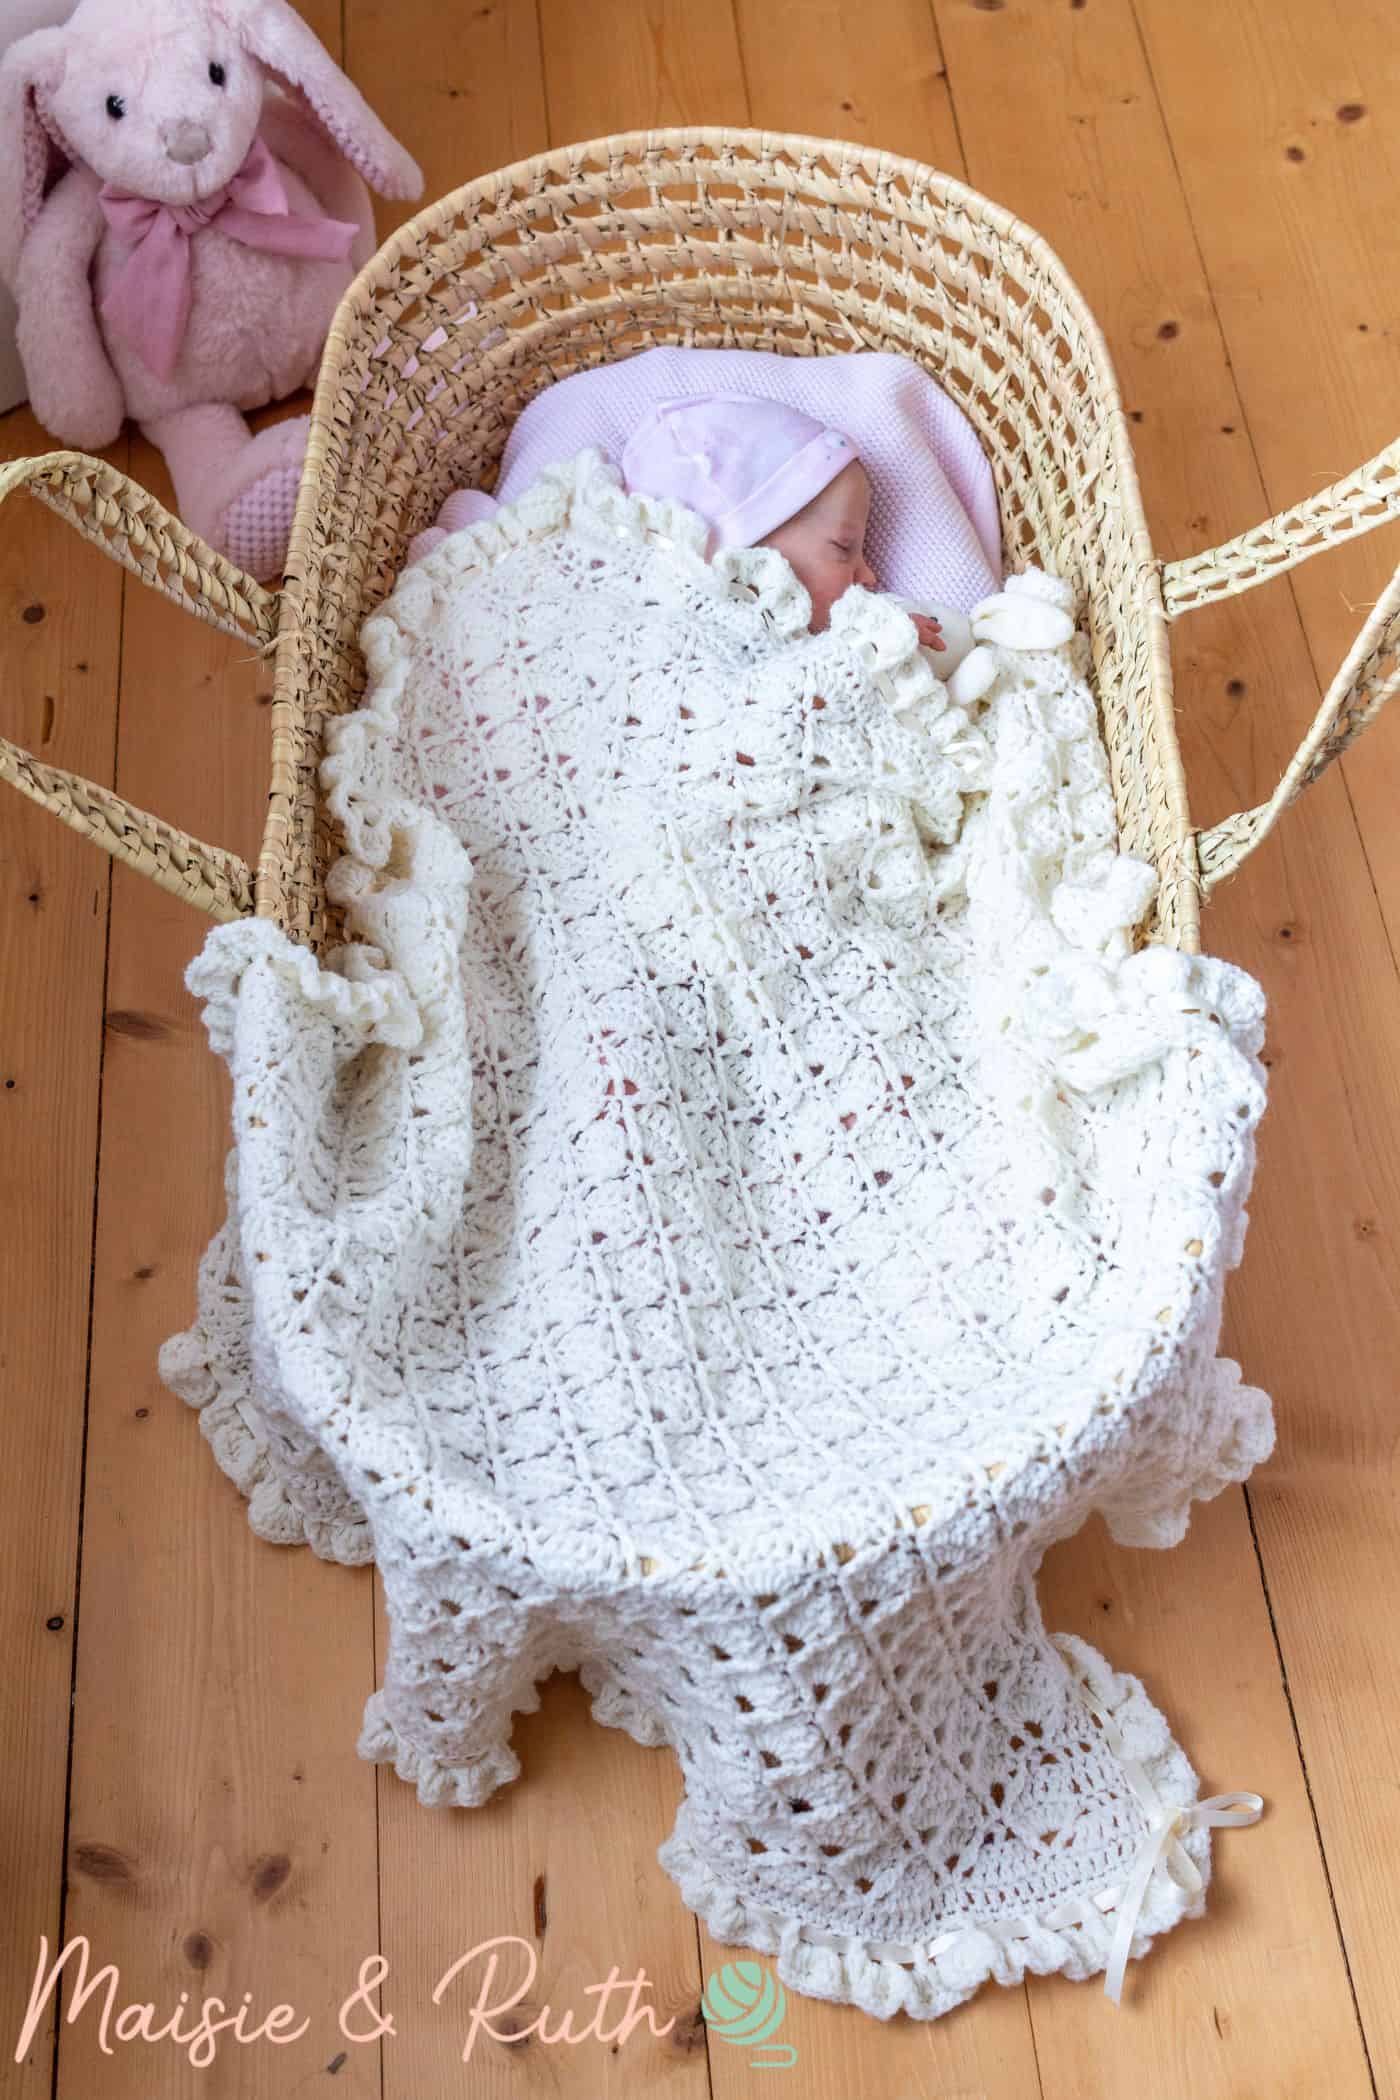 Crochet Baby Blanket Pattern With Baby in Basket